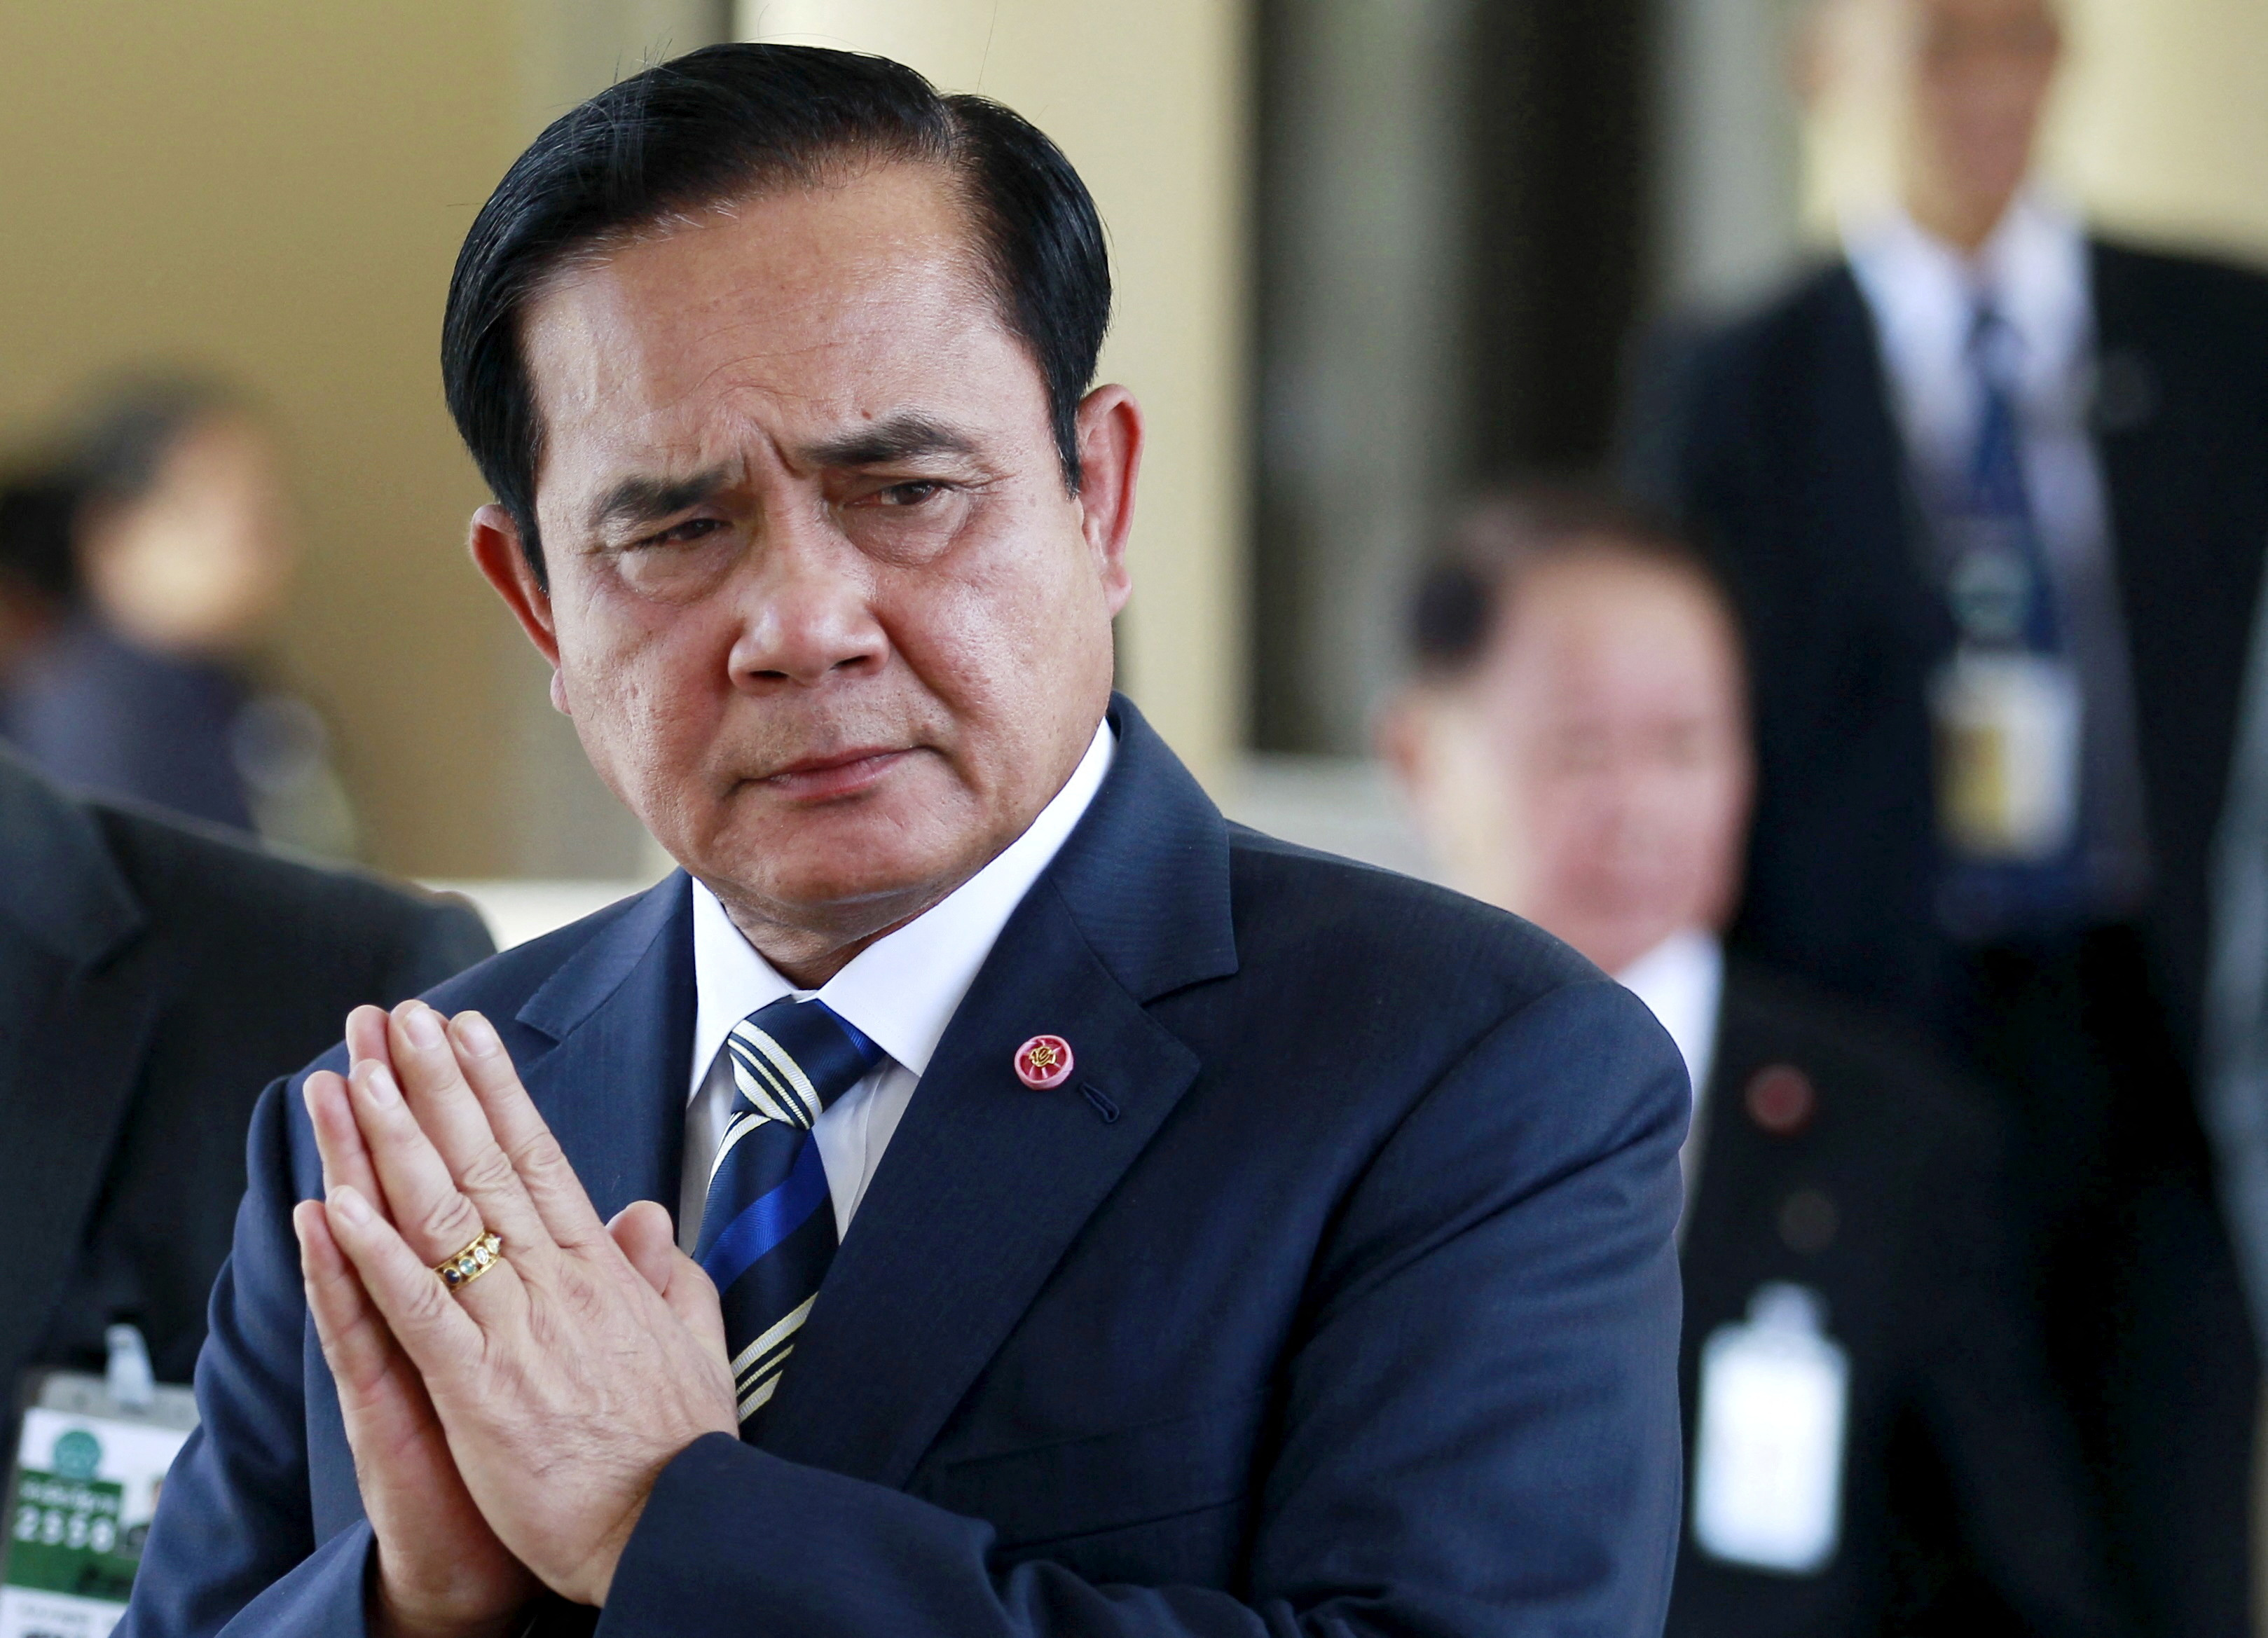 Thailand's Prime Minister Prayuth Chan-ocha gestures after presiding over Thailand Corporate Excellence Award for Financial Management at the Government House in Bangkok, Thailand